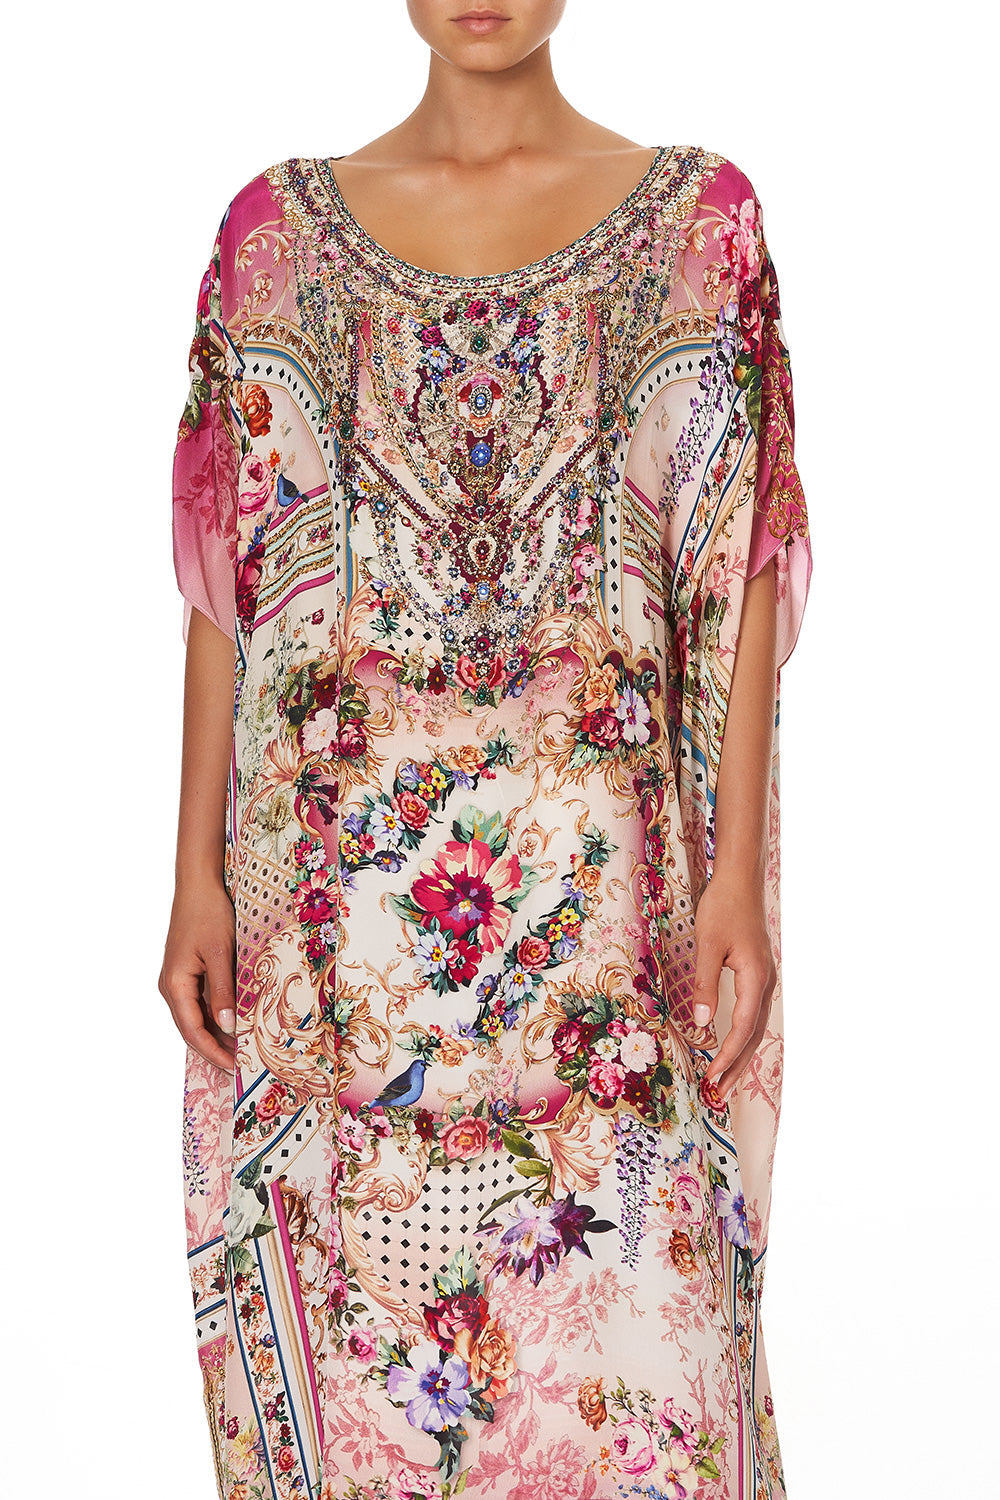 ROUND NECK KAFTAN SUMMONED BY A ROSE